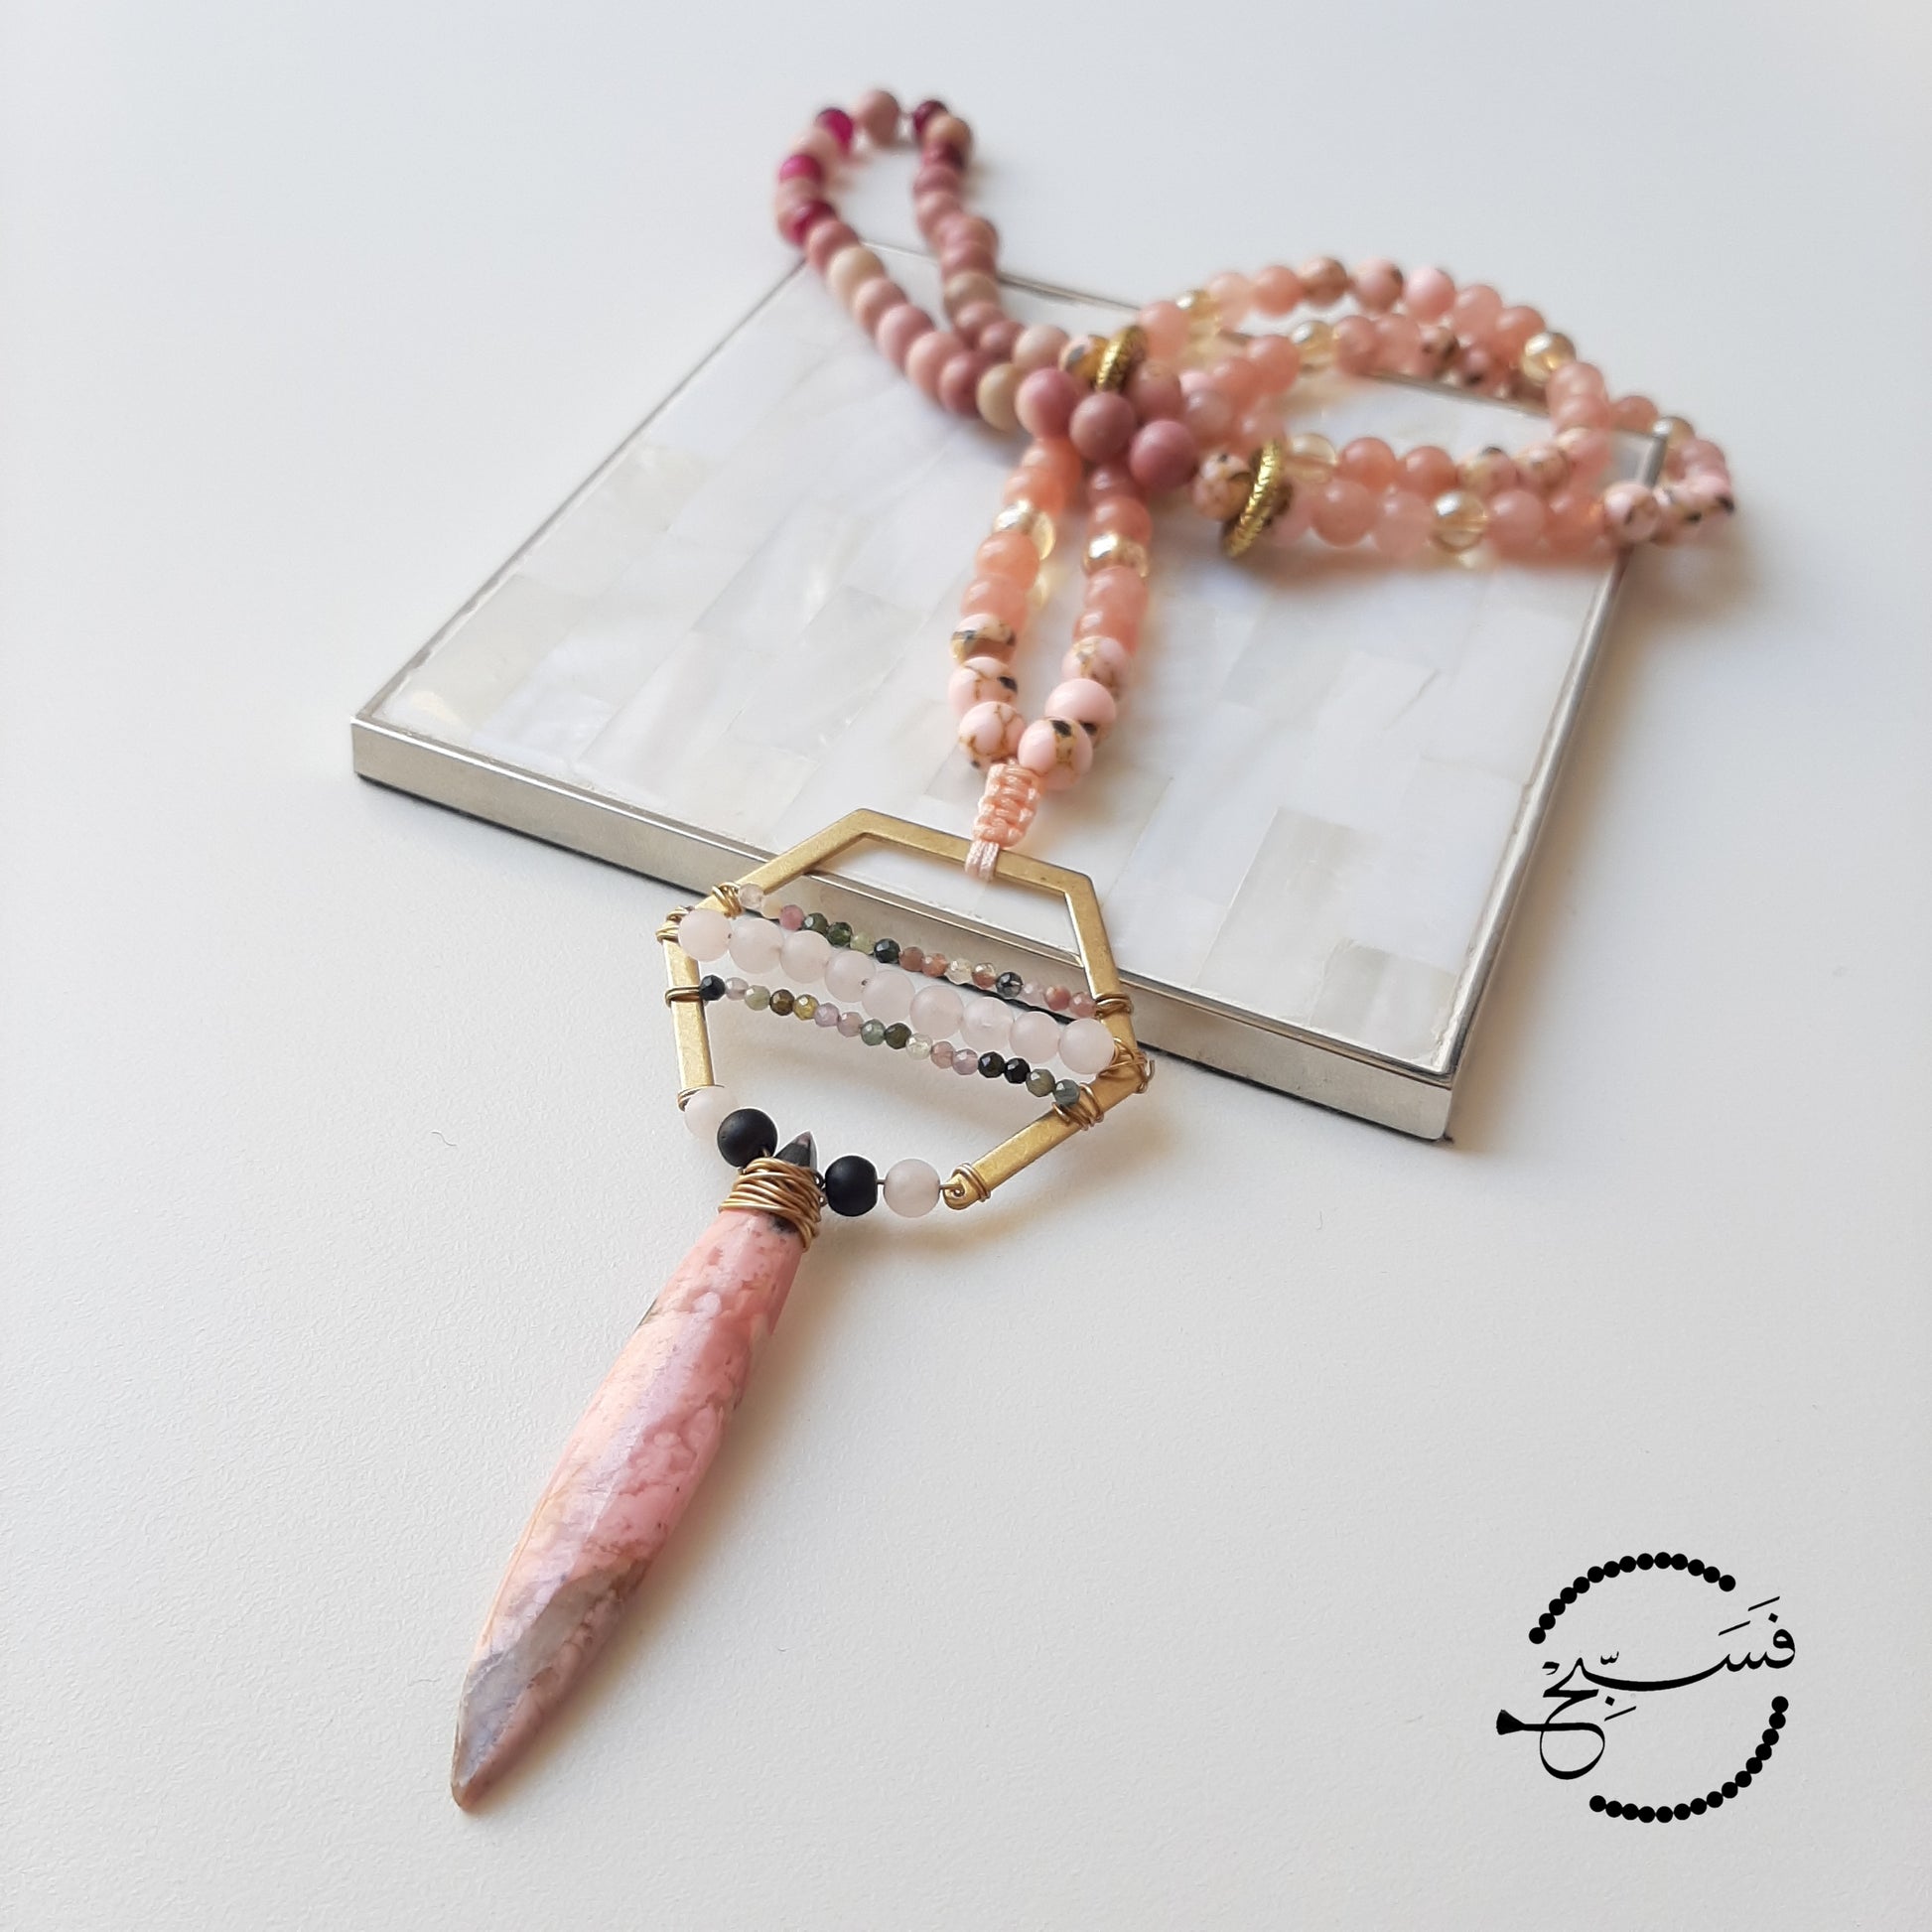 Natural rhodonite stone which has a beautiful shape and feel. Handcrafted to form a unique and intricate pendant with mini rose quartz and tourmaline beads.  Packaged in a luxurious pouch and a gift box.  99 beads